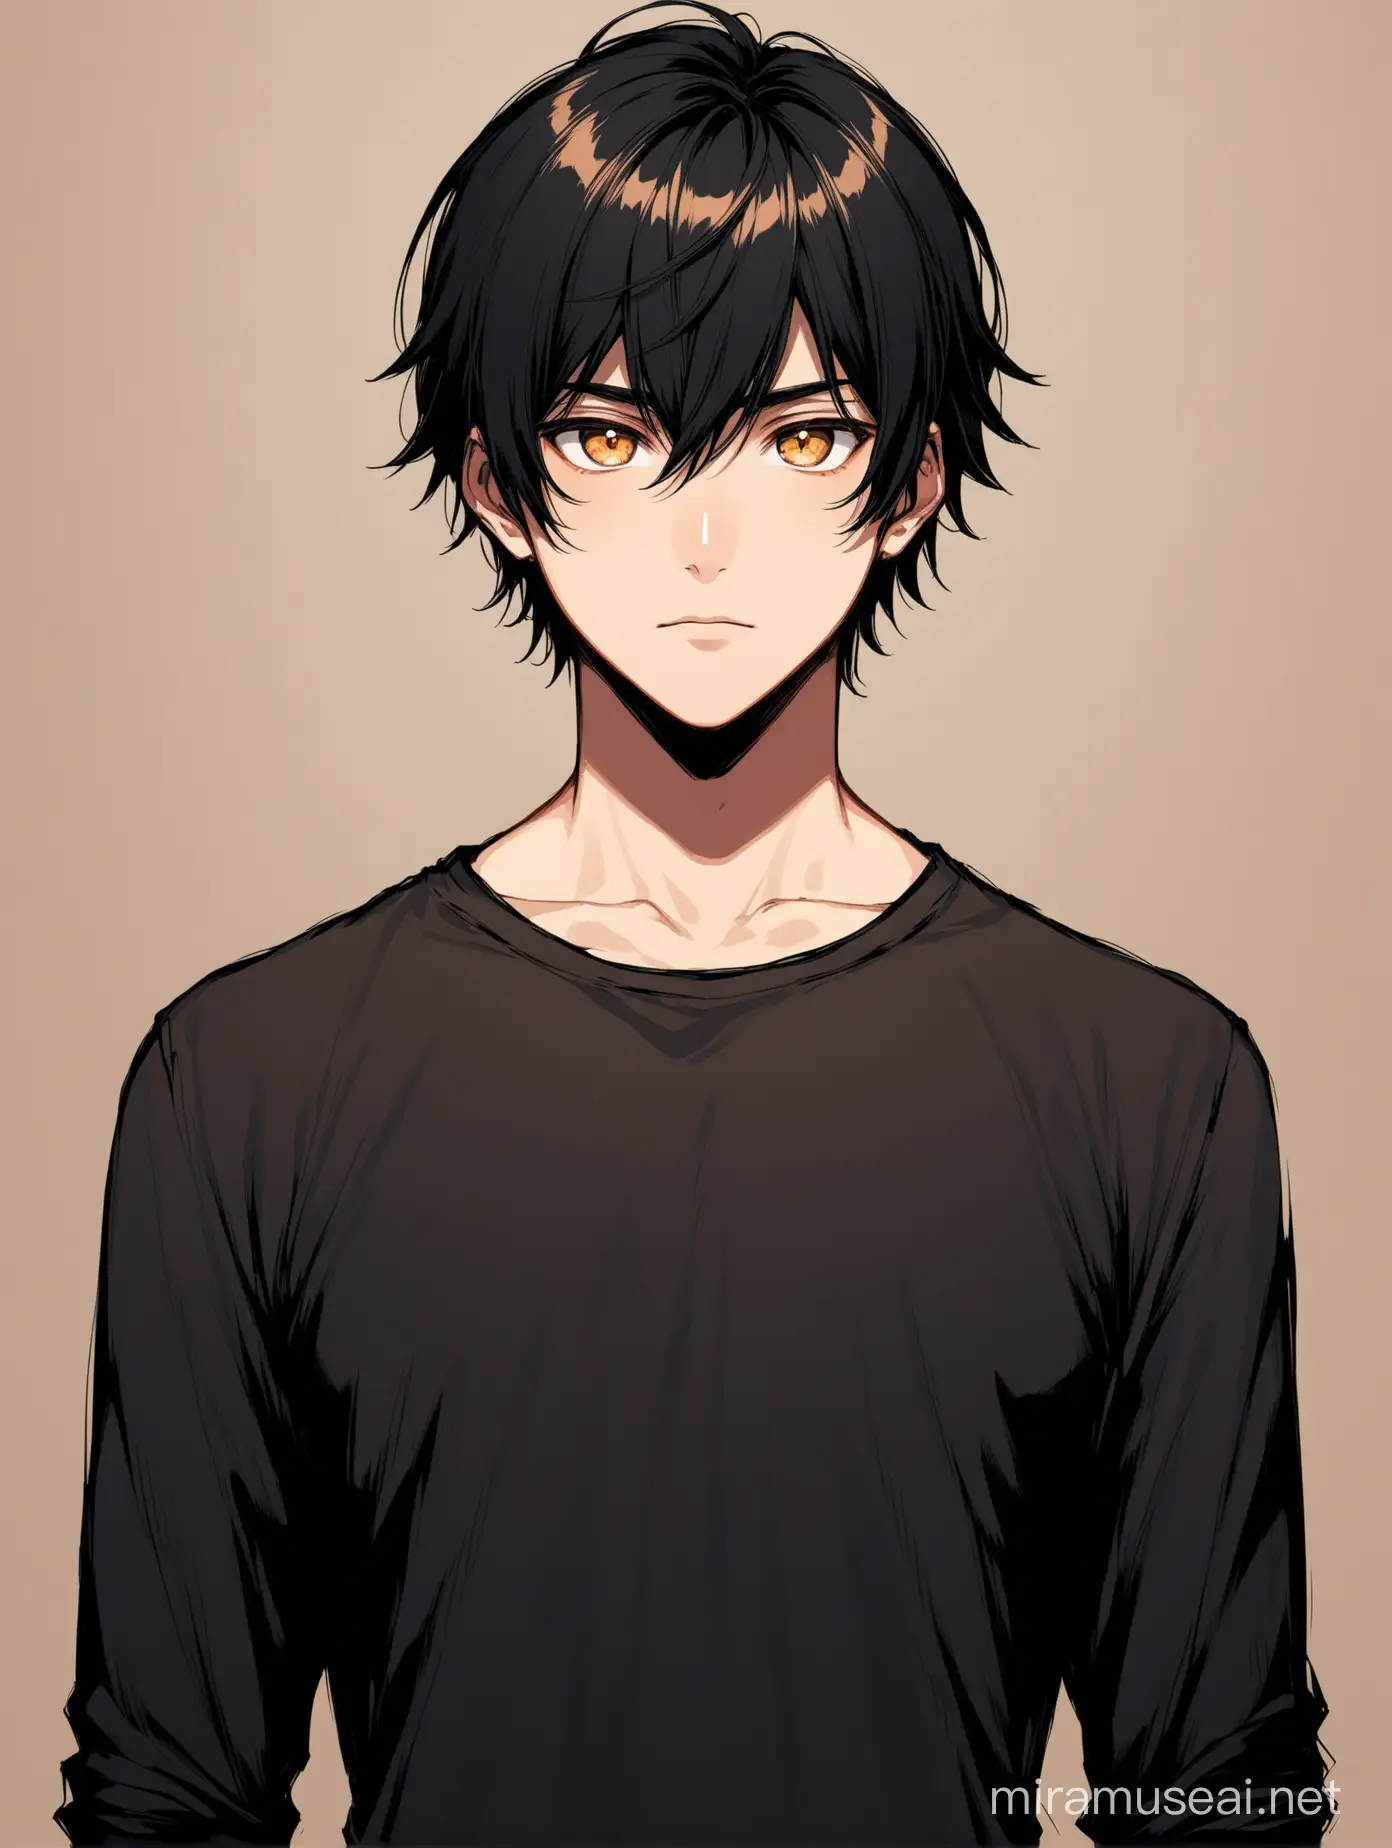  male character with black hair with bangs, sharp eyes, minimal accessories, honey brown eyes.  show till torso. front view
